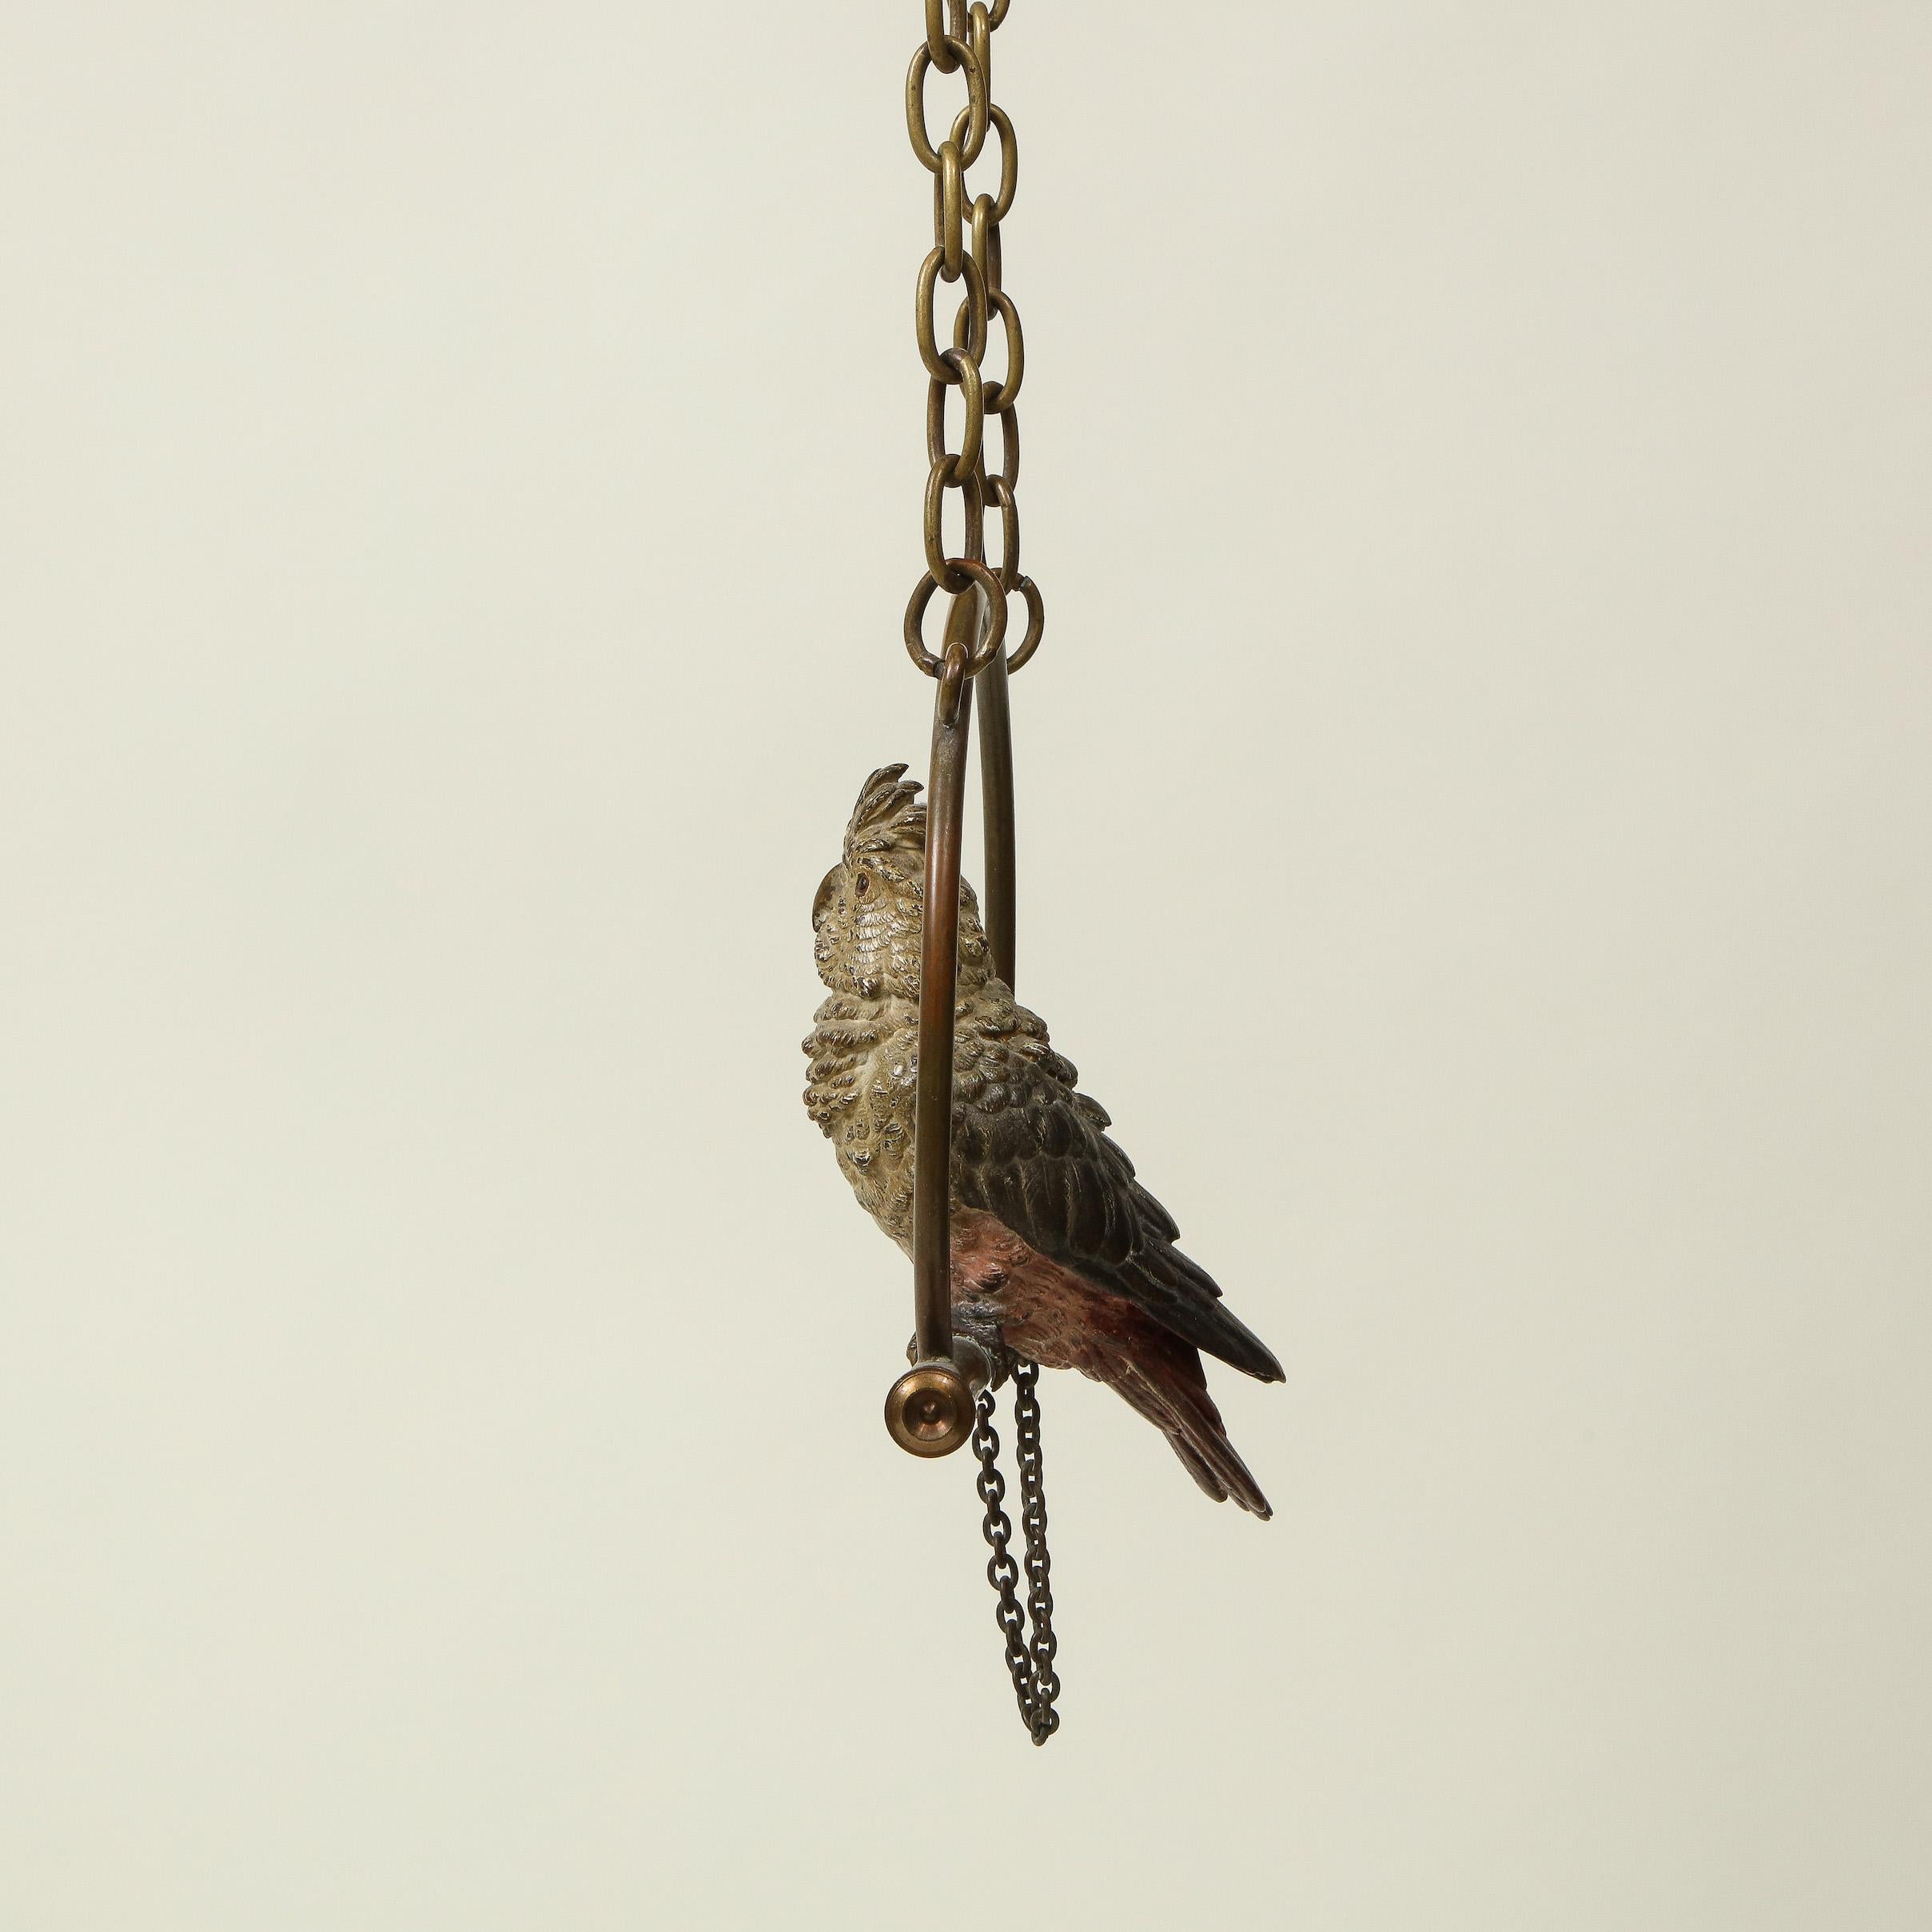 19th Century Conservatory Polychrome Cold-Painted Metal Cockatoo on Hanging Perch For Sale